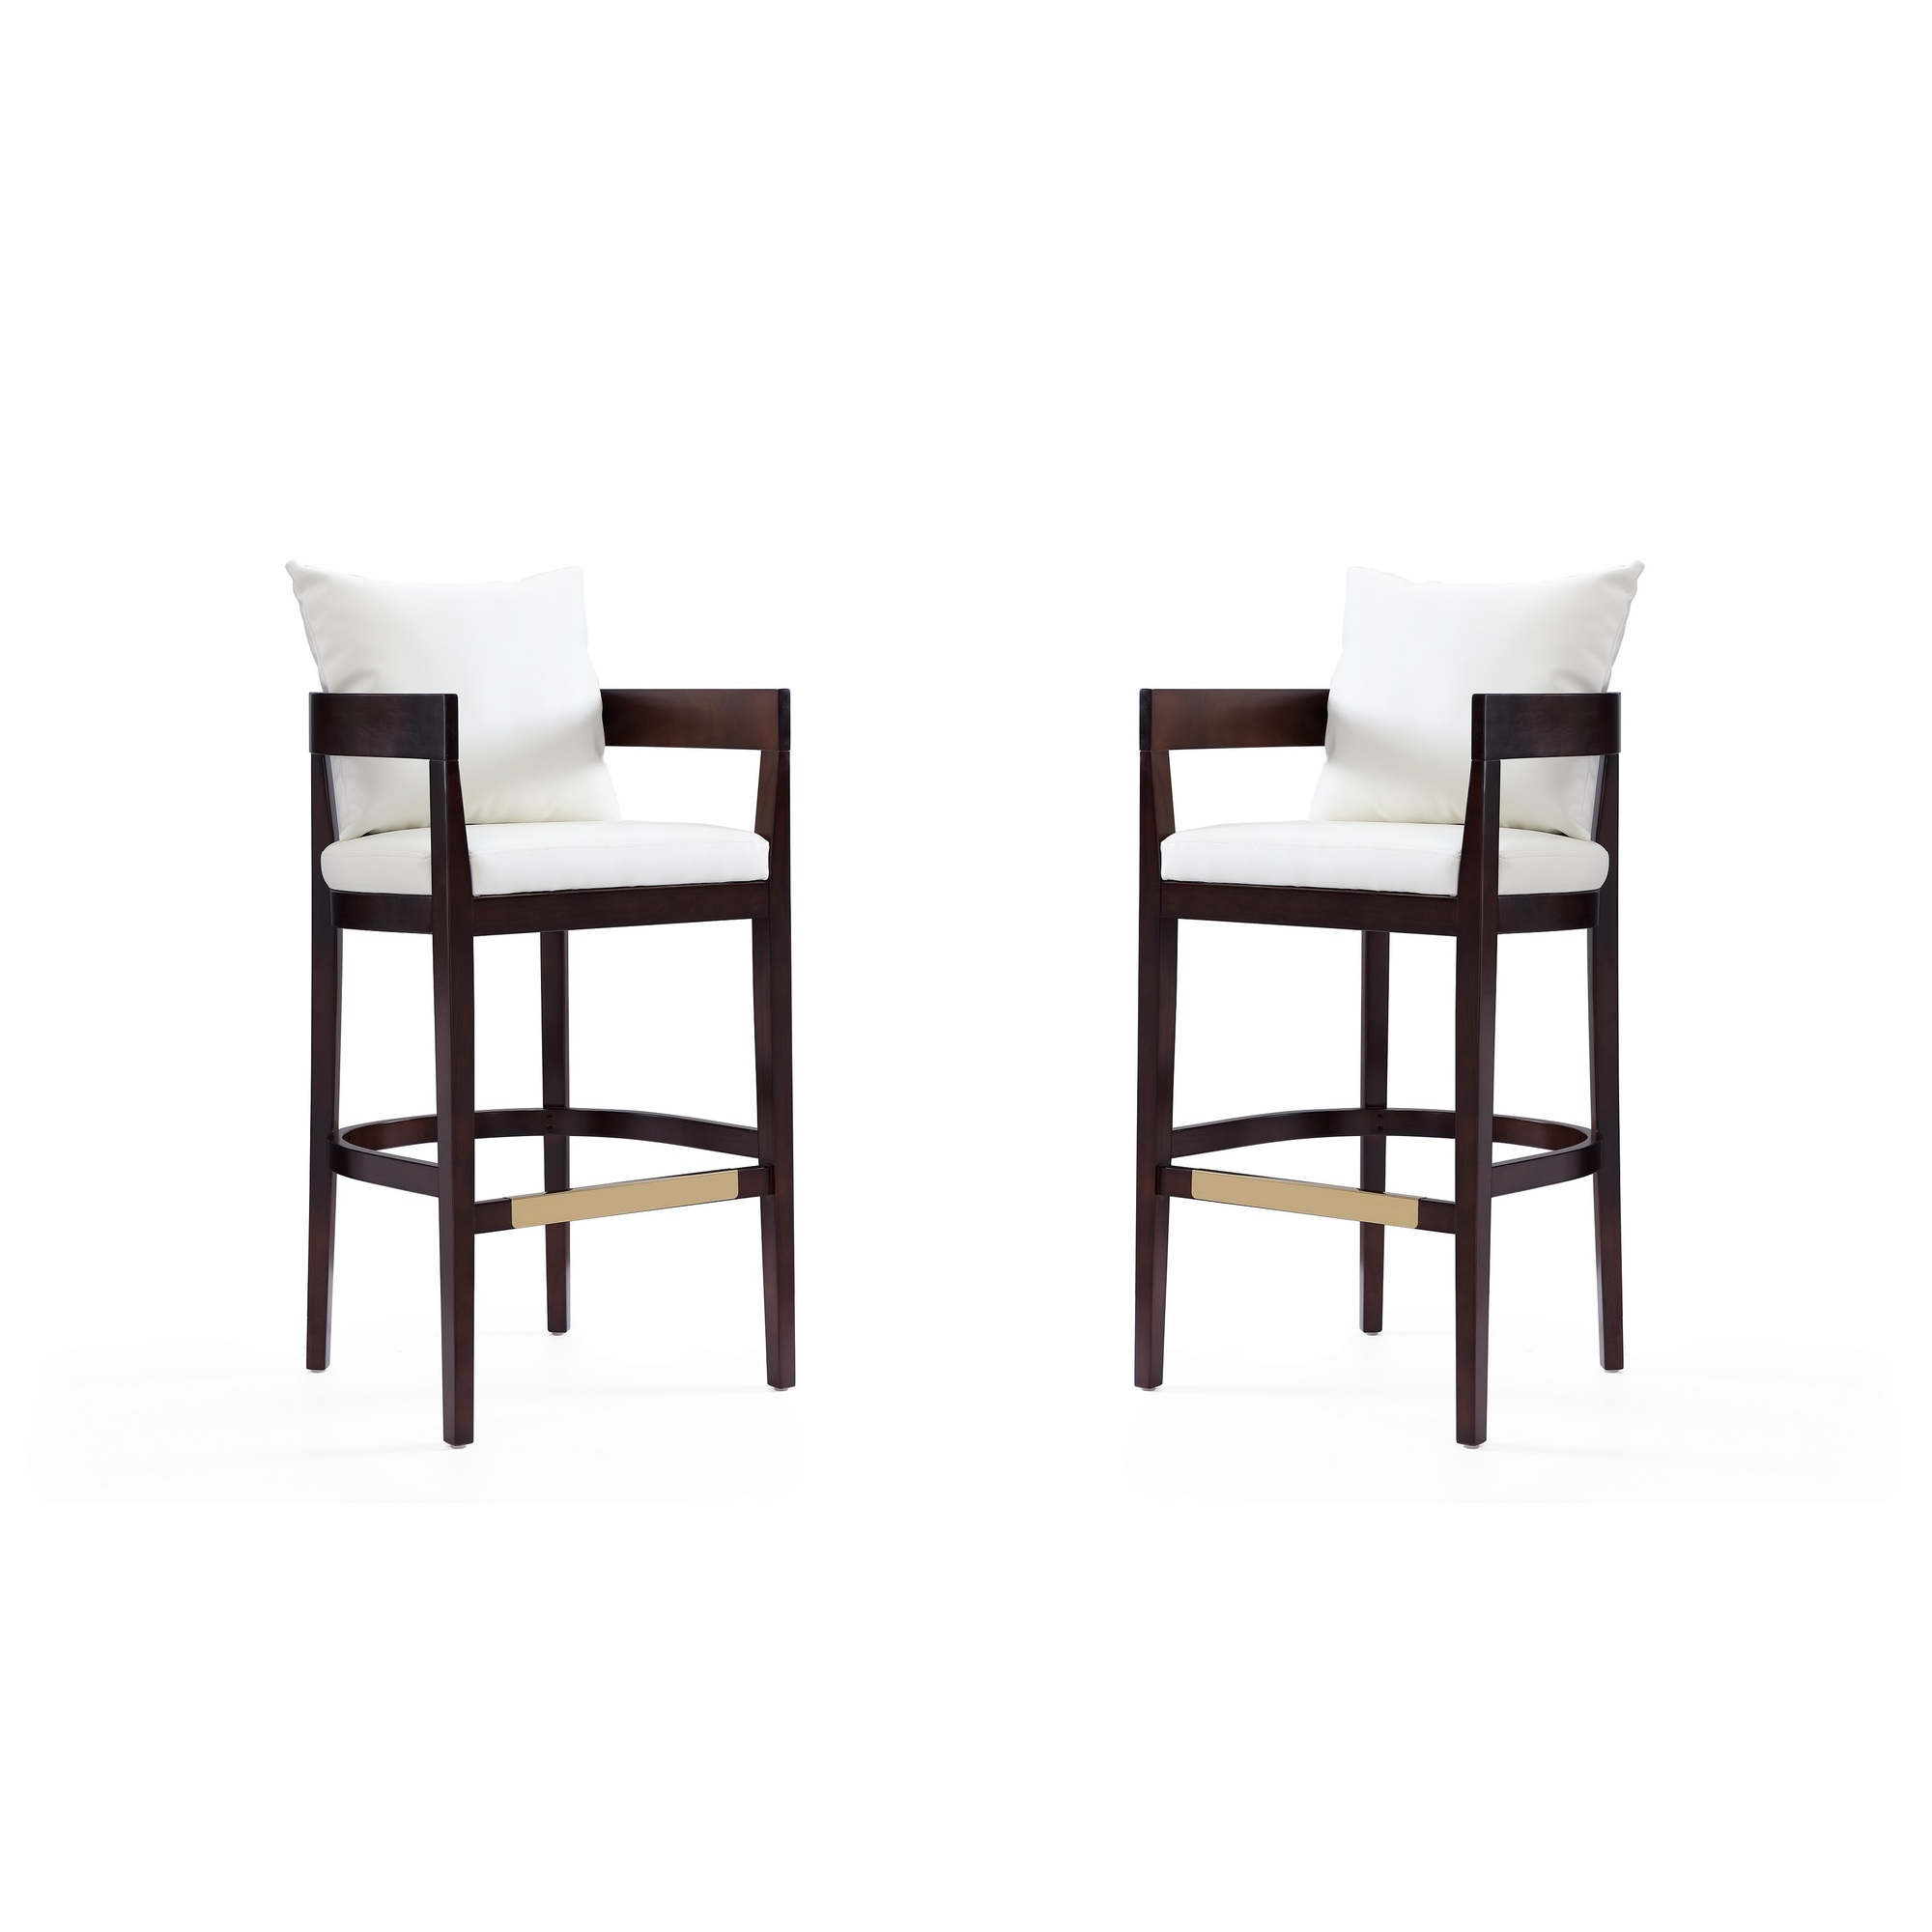 Manhattan Comfort, Ritz 38Inch Ivory Beech Wood Stool Set of 2 Primary Color Ivory, Included (qty.) 2 Model 2-BS013